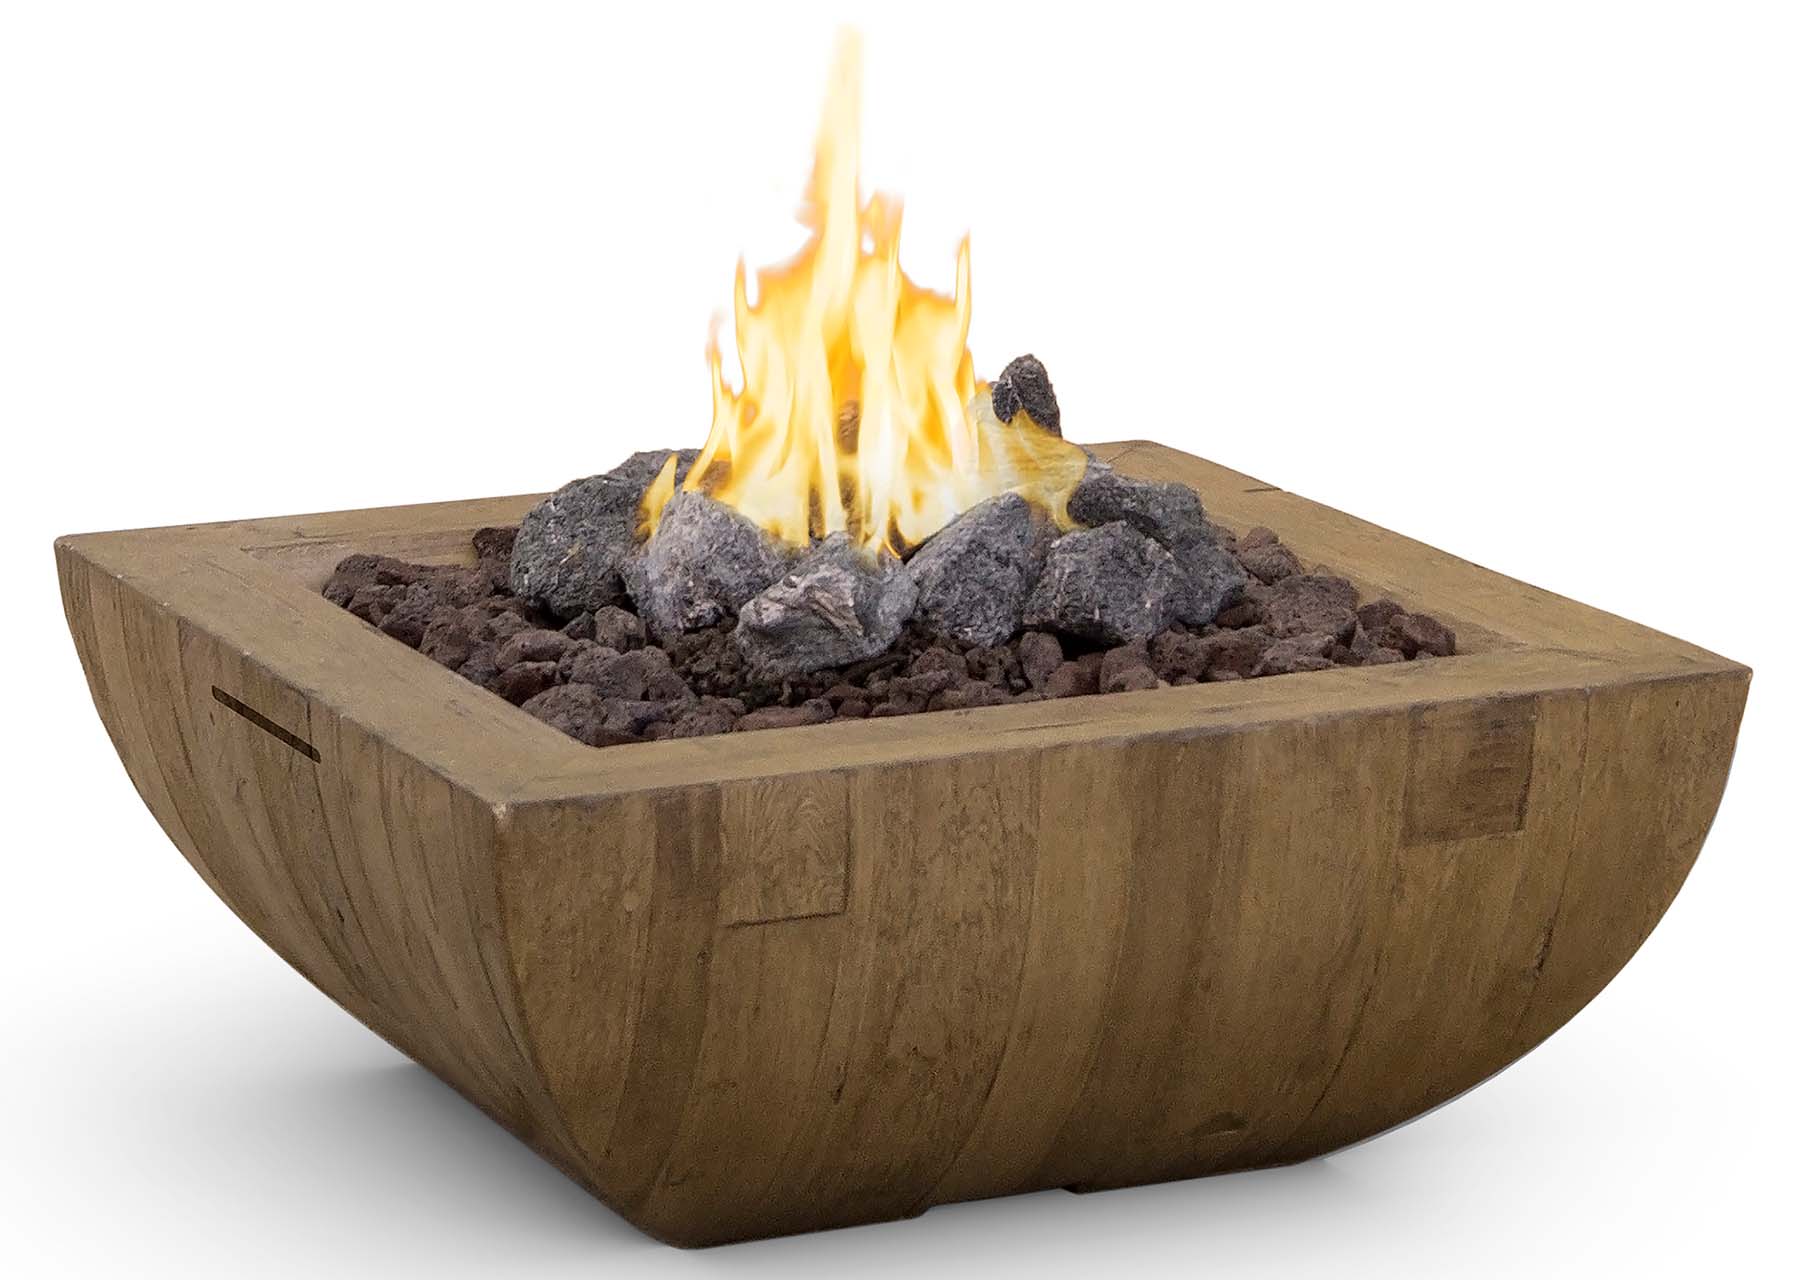 AFD_430-FO-FO-M_Reclaimed-Wood-Bordeaux-Square-Fire-Bowl